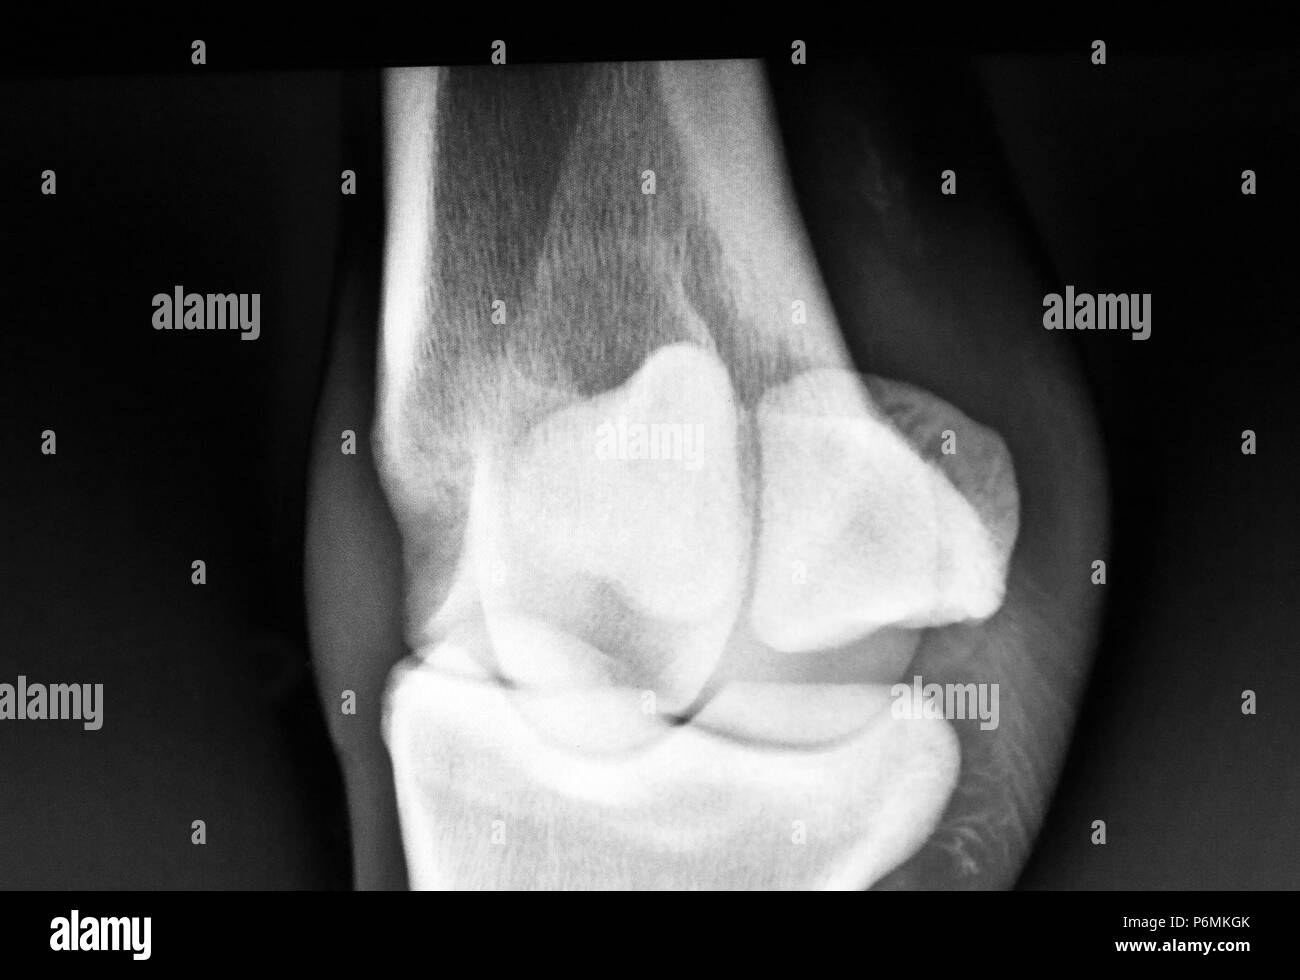 Melbeck, Roentgen picture of a fetlock joint and the same legs Stock Photo